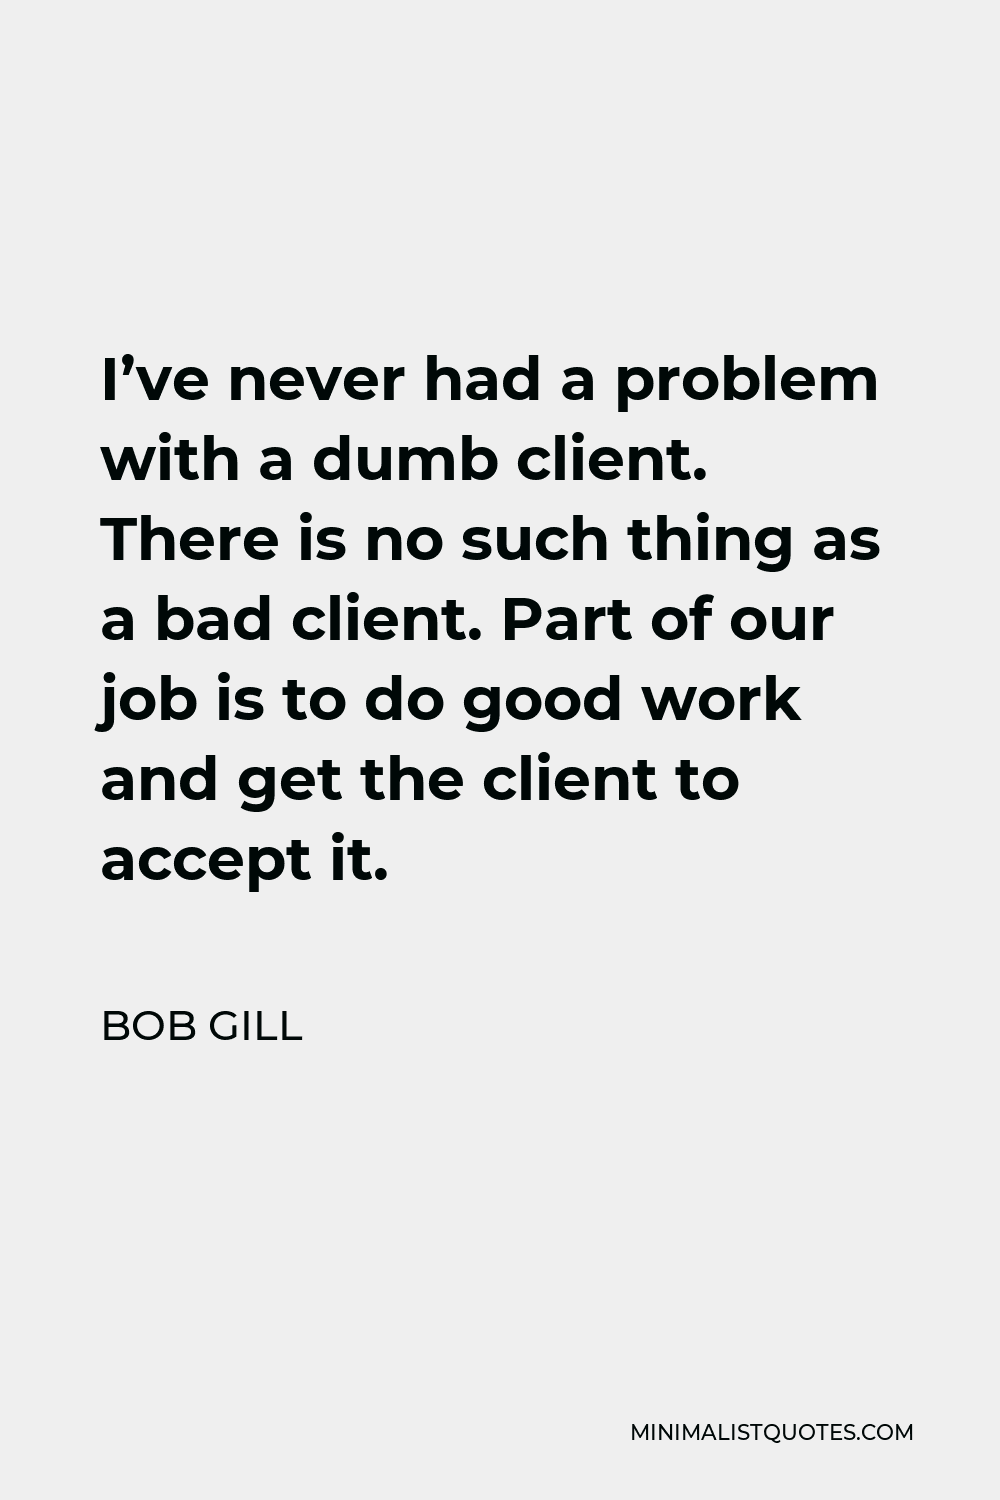 Bob Gill Quote - I’ve never had a problem with a dumb client. There is no such thing as a bad client. Part of our job is to do good work and get the client to accept it.